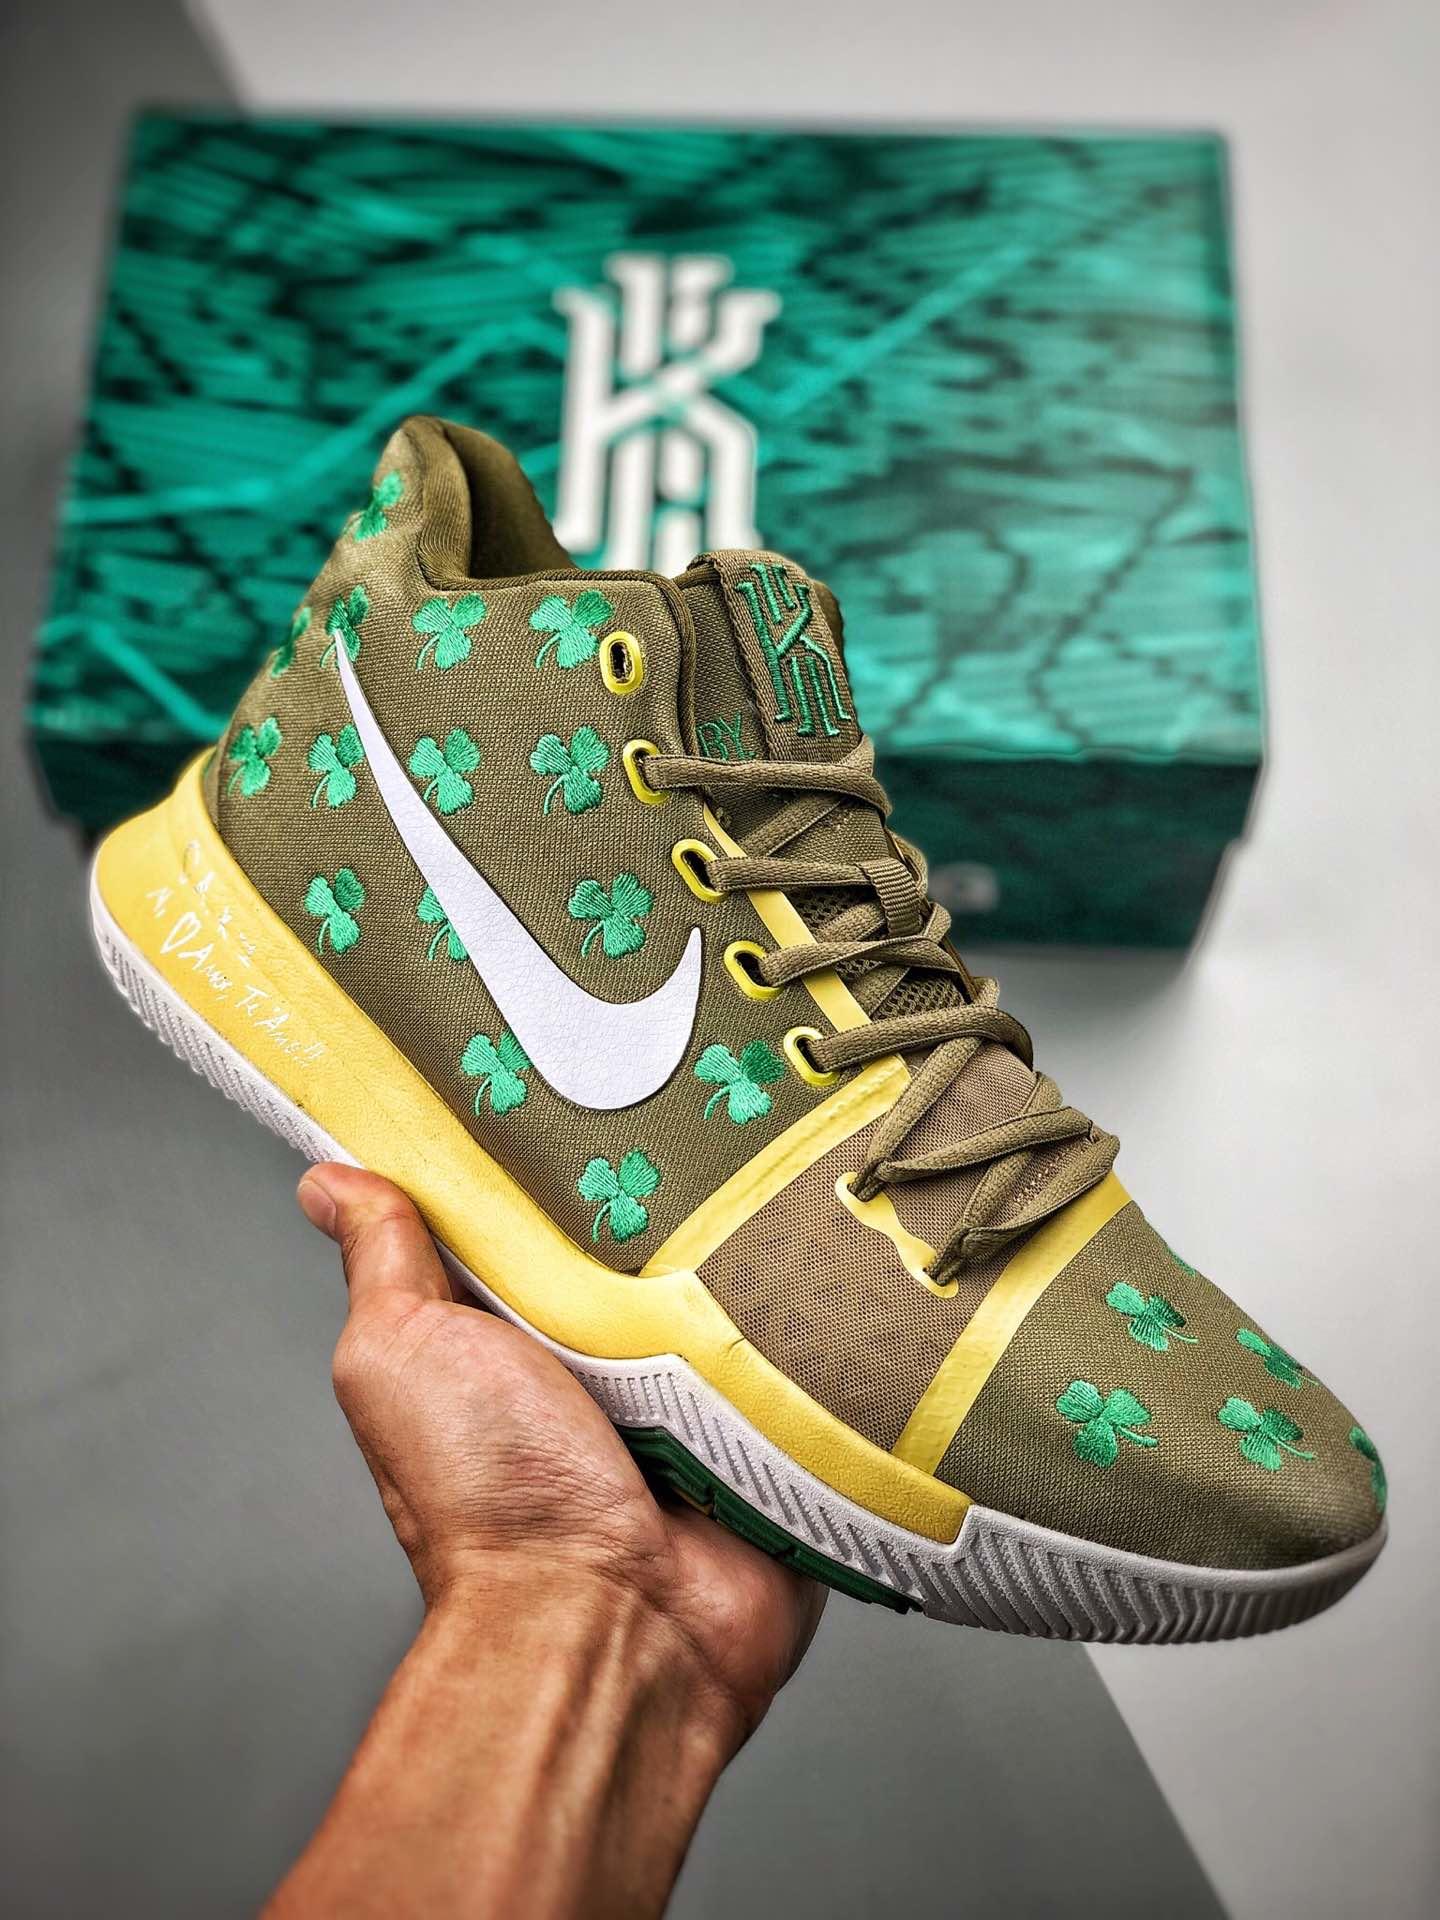 kyrie 3 luck shoes